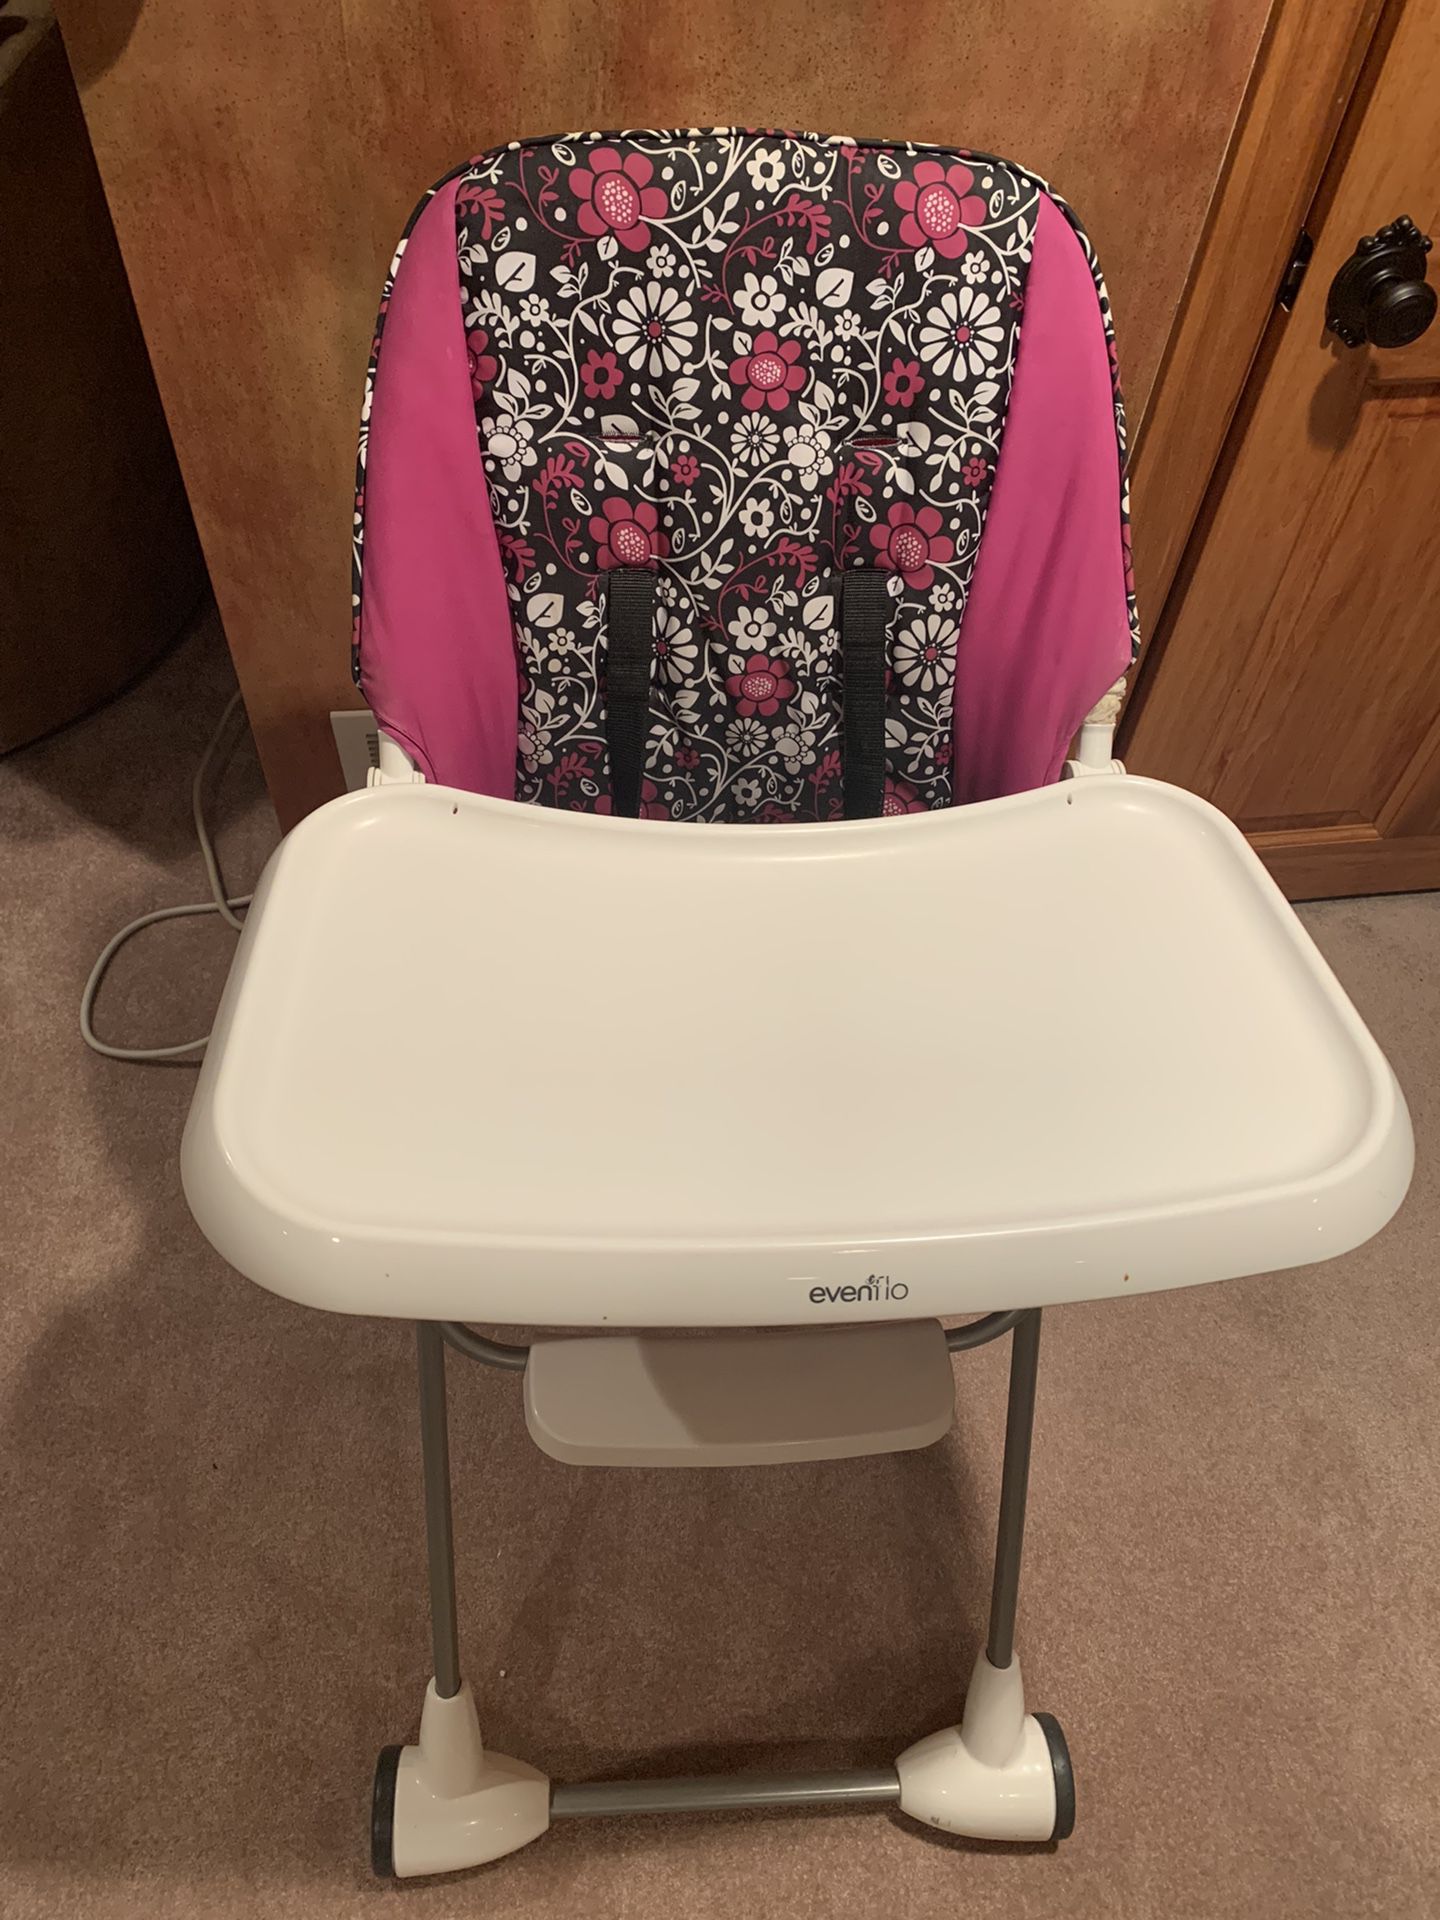 Evenflo High Chair For Babies And Toddlers, Black And Pink, Removable Tray